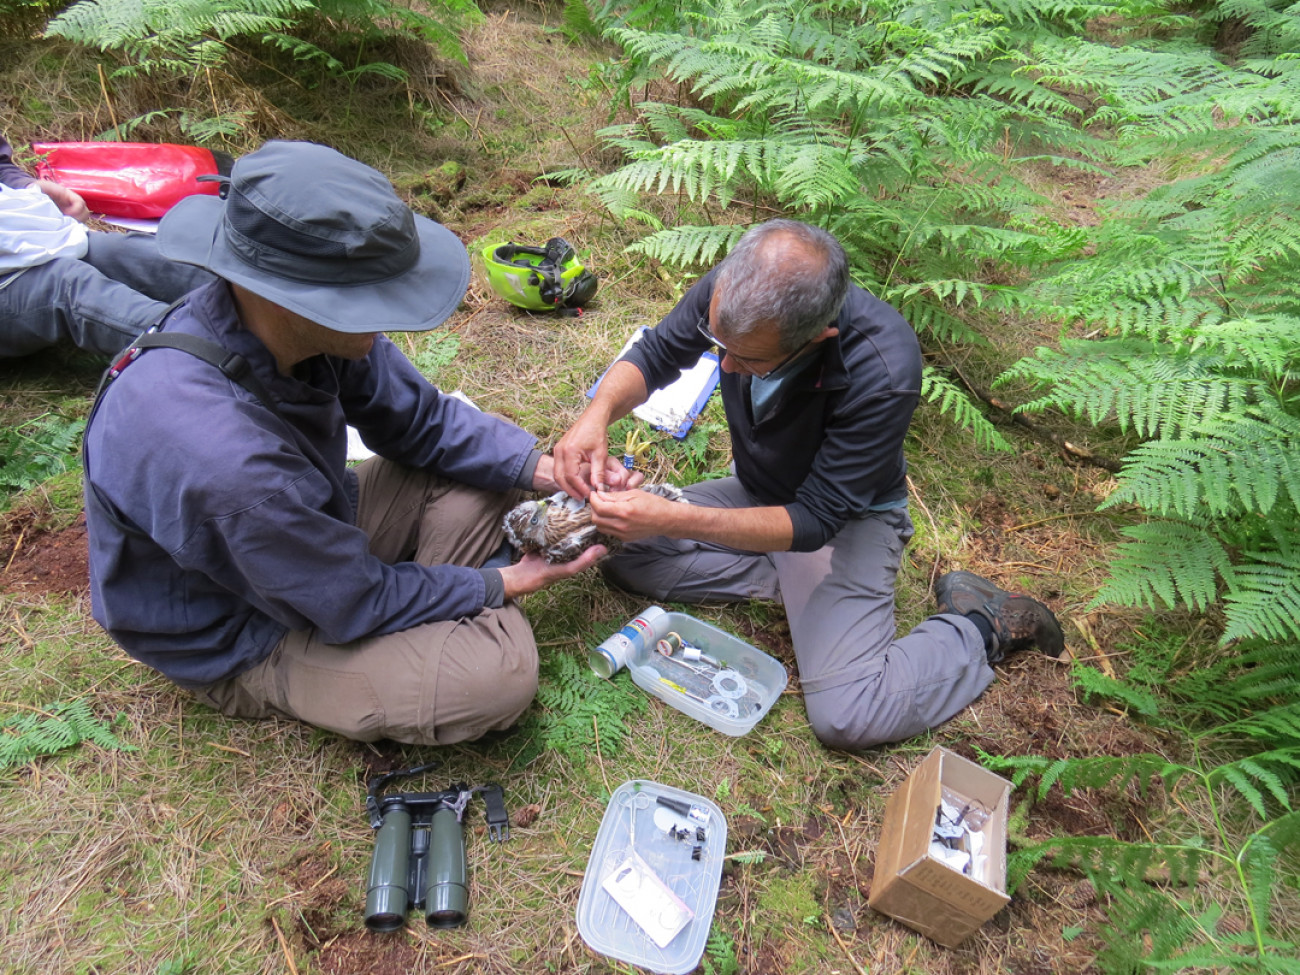 Fitting a Goshawk with a GPS tracking device